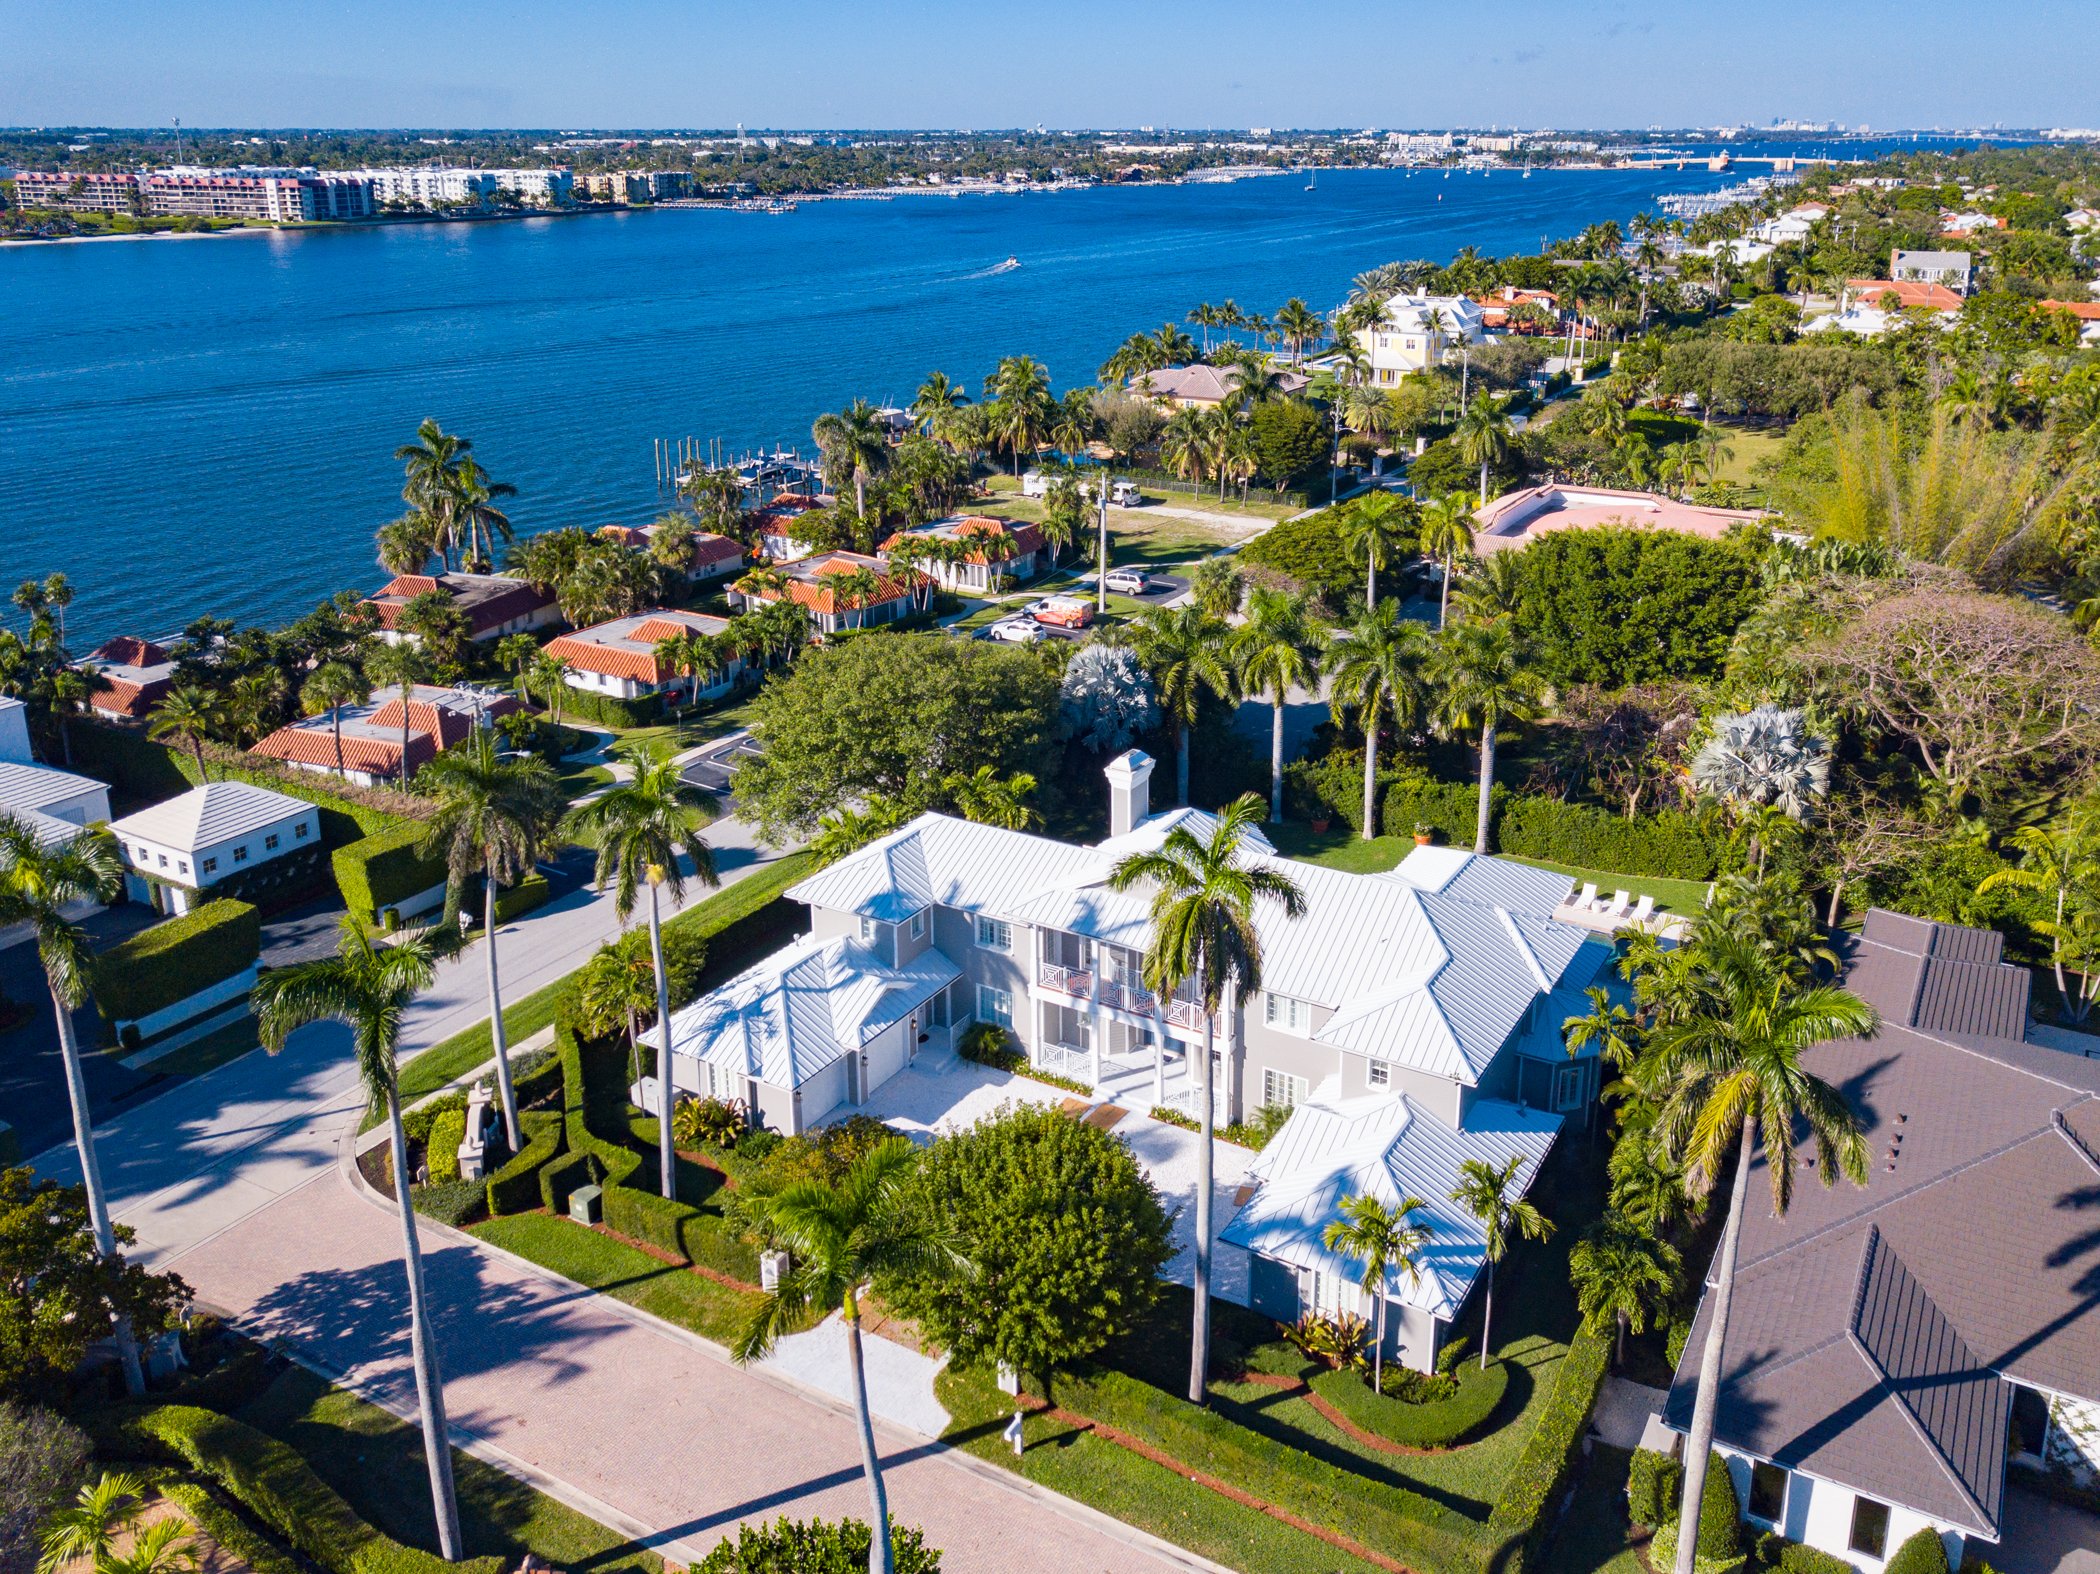 Check Out This Newly Renovated Coastal Contemporary In The Exclusive Point Manalapan Which Just Listed For $7.995 Million 128.jpg